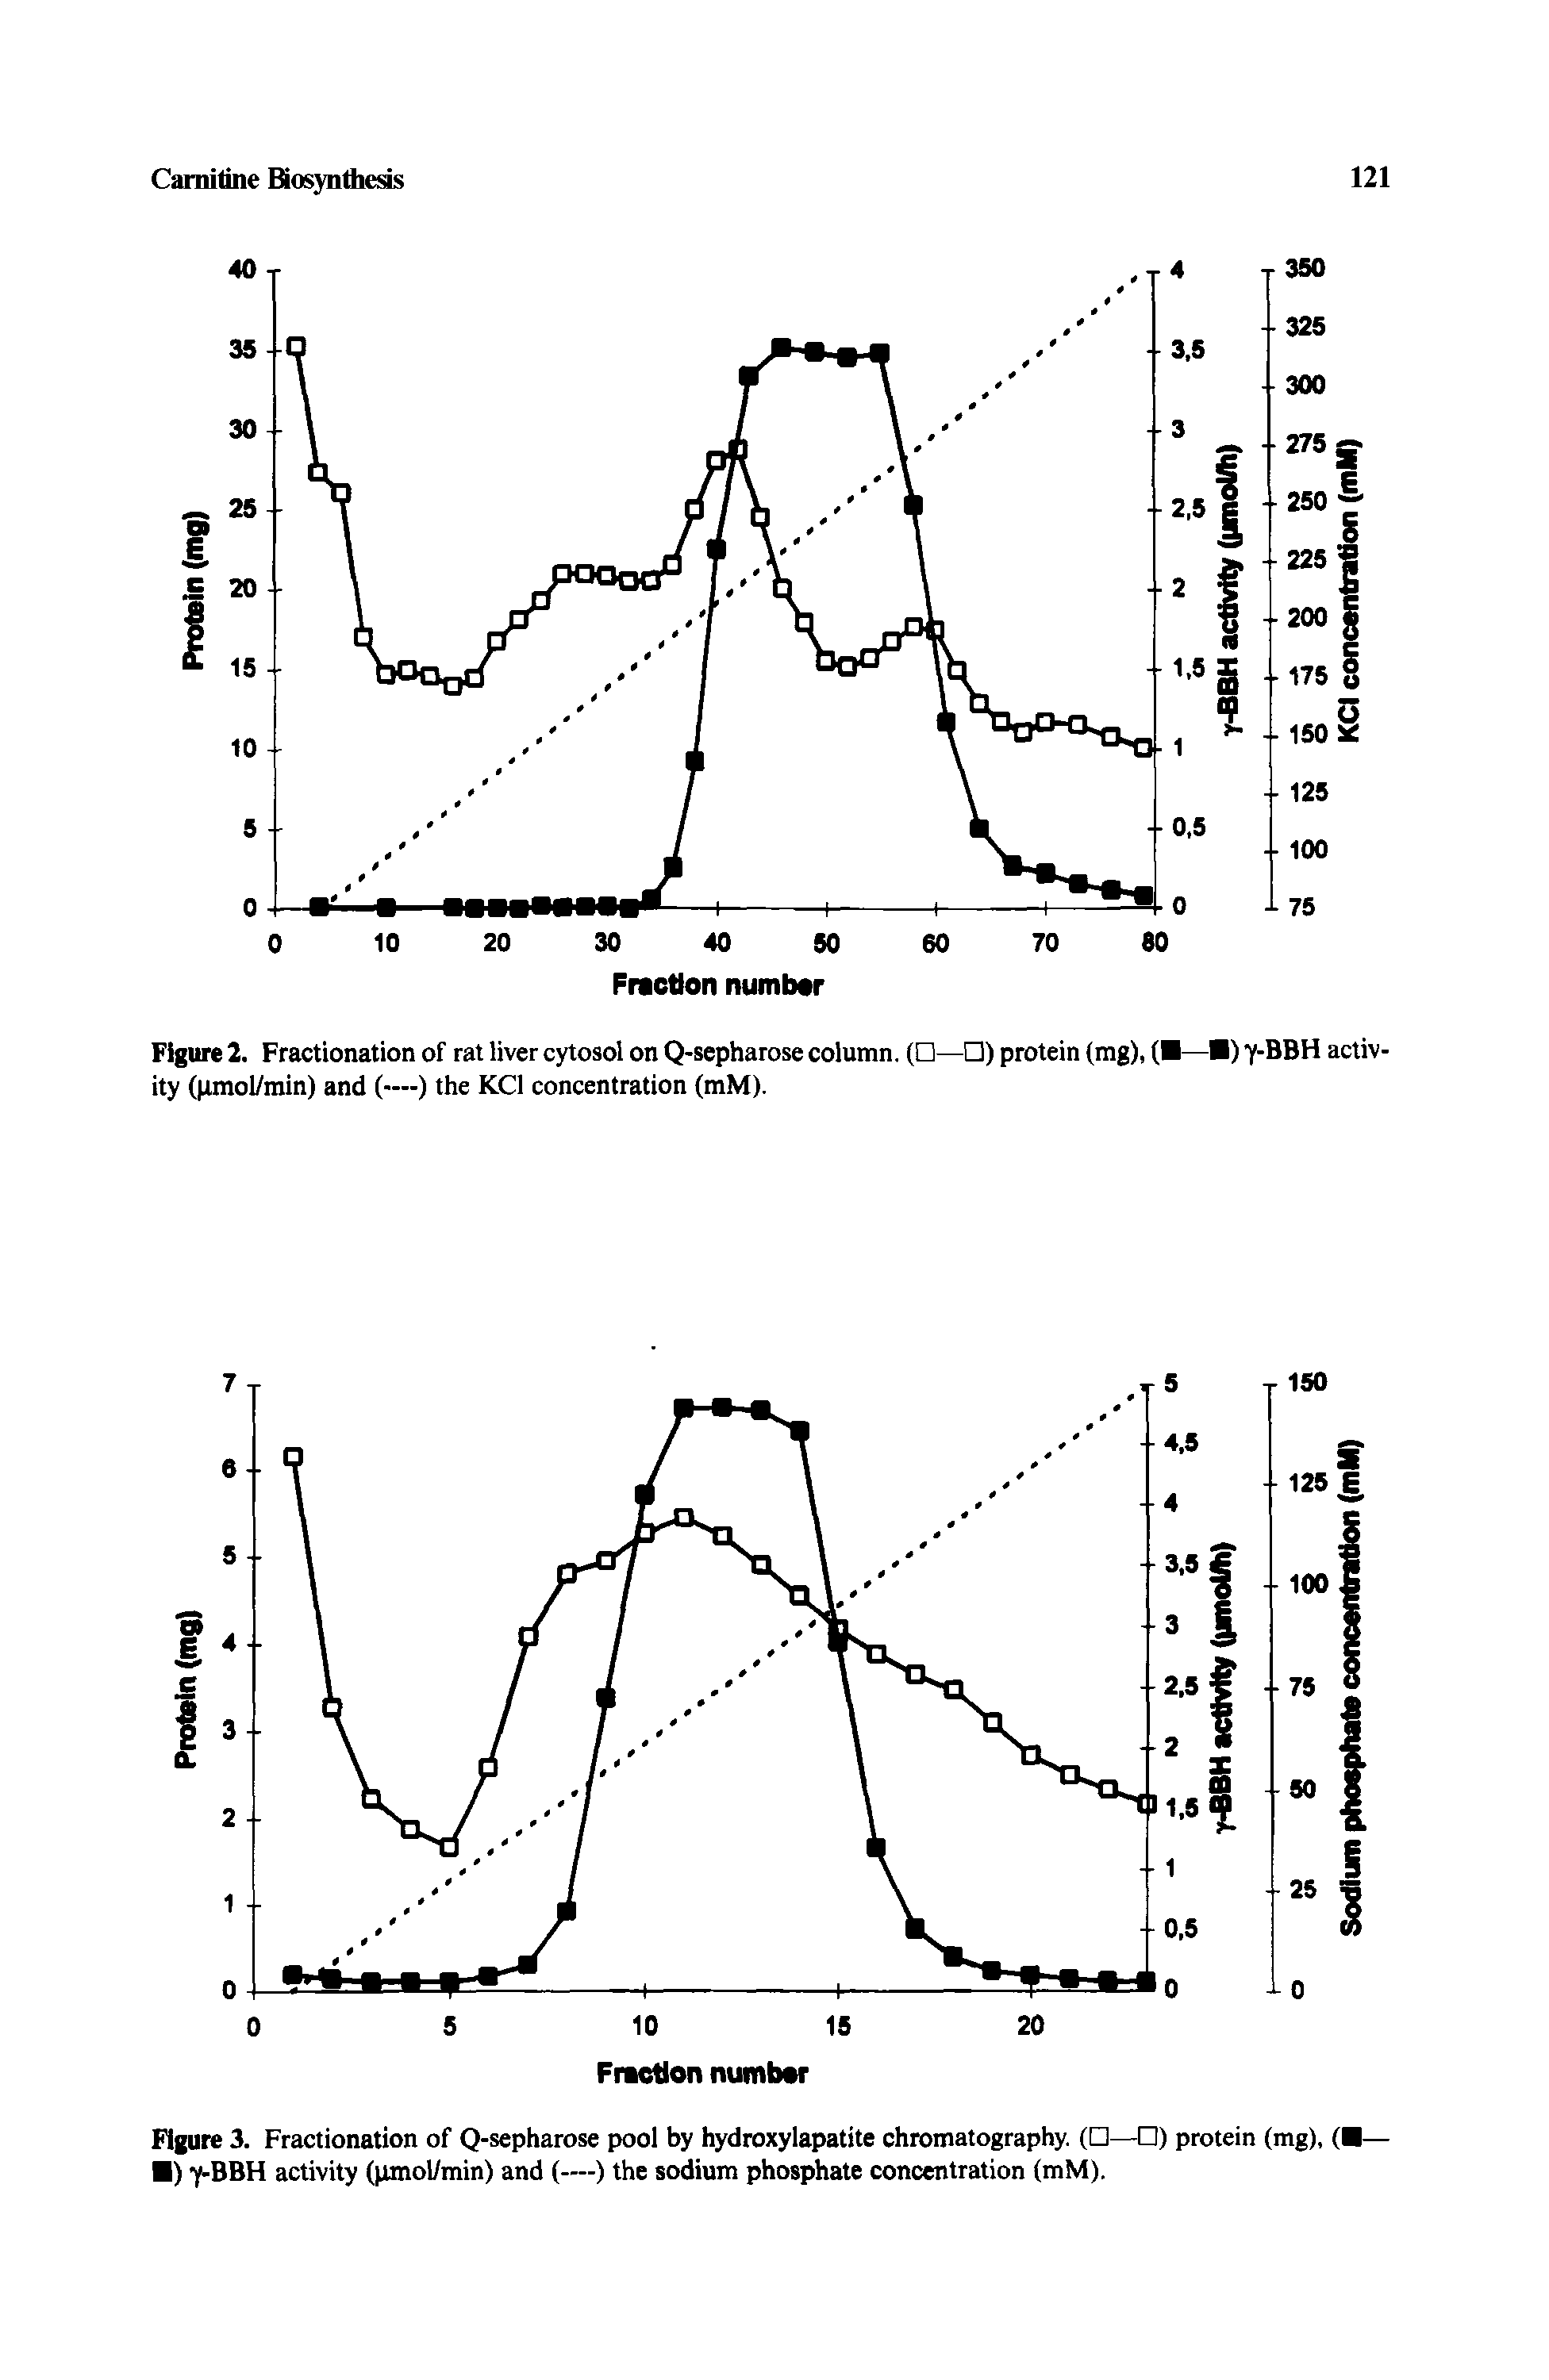 Figure 3. Fractionation of Q-sepharose pool by hydroxylapatite chromatography. ( — ) protein (mg), ( — ) Y-BBH activity (pmol/min) and (—) the sodium phosphate concentration (mM).